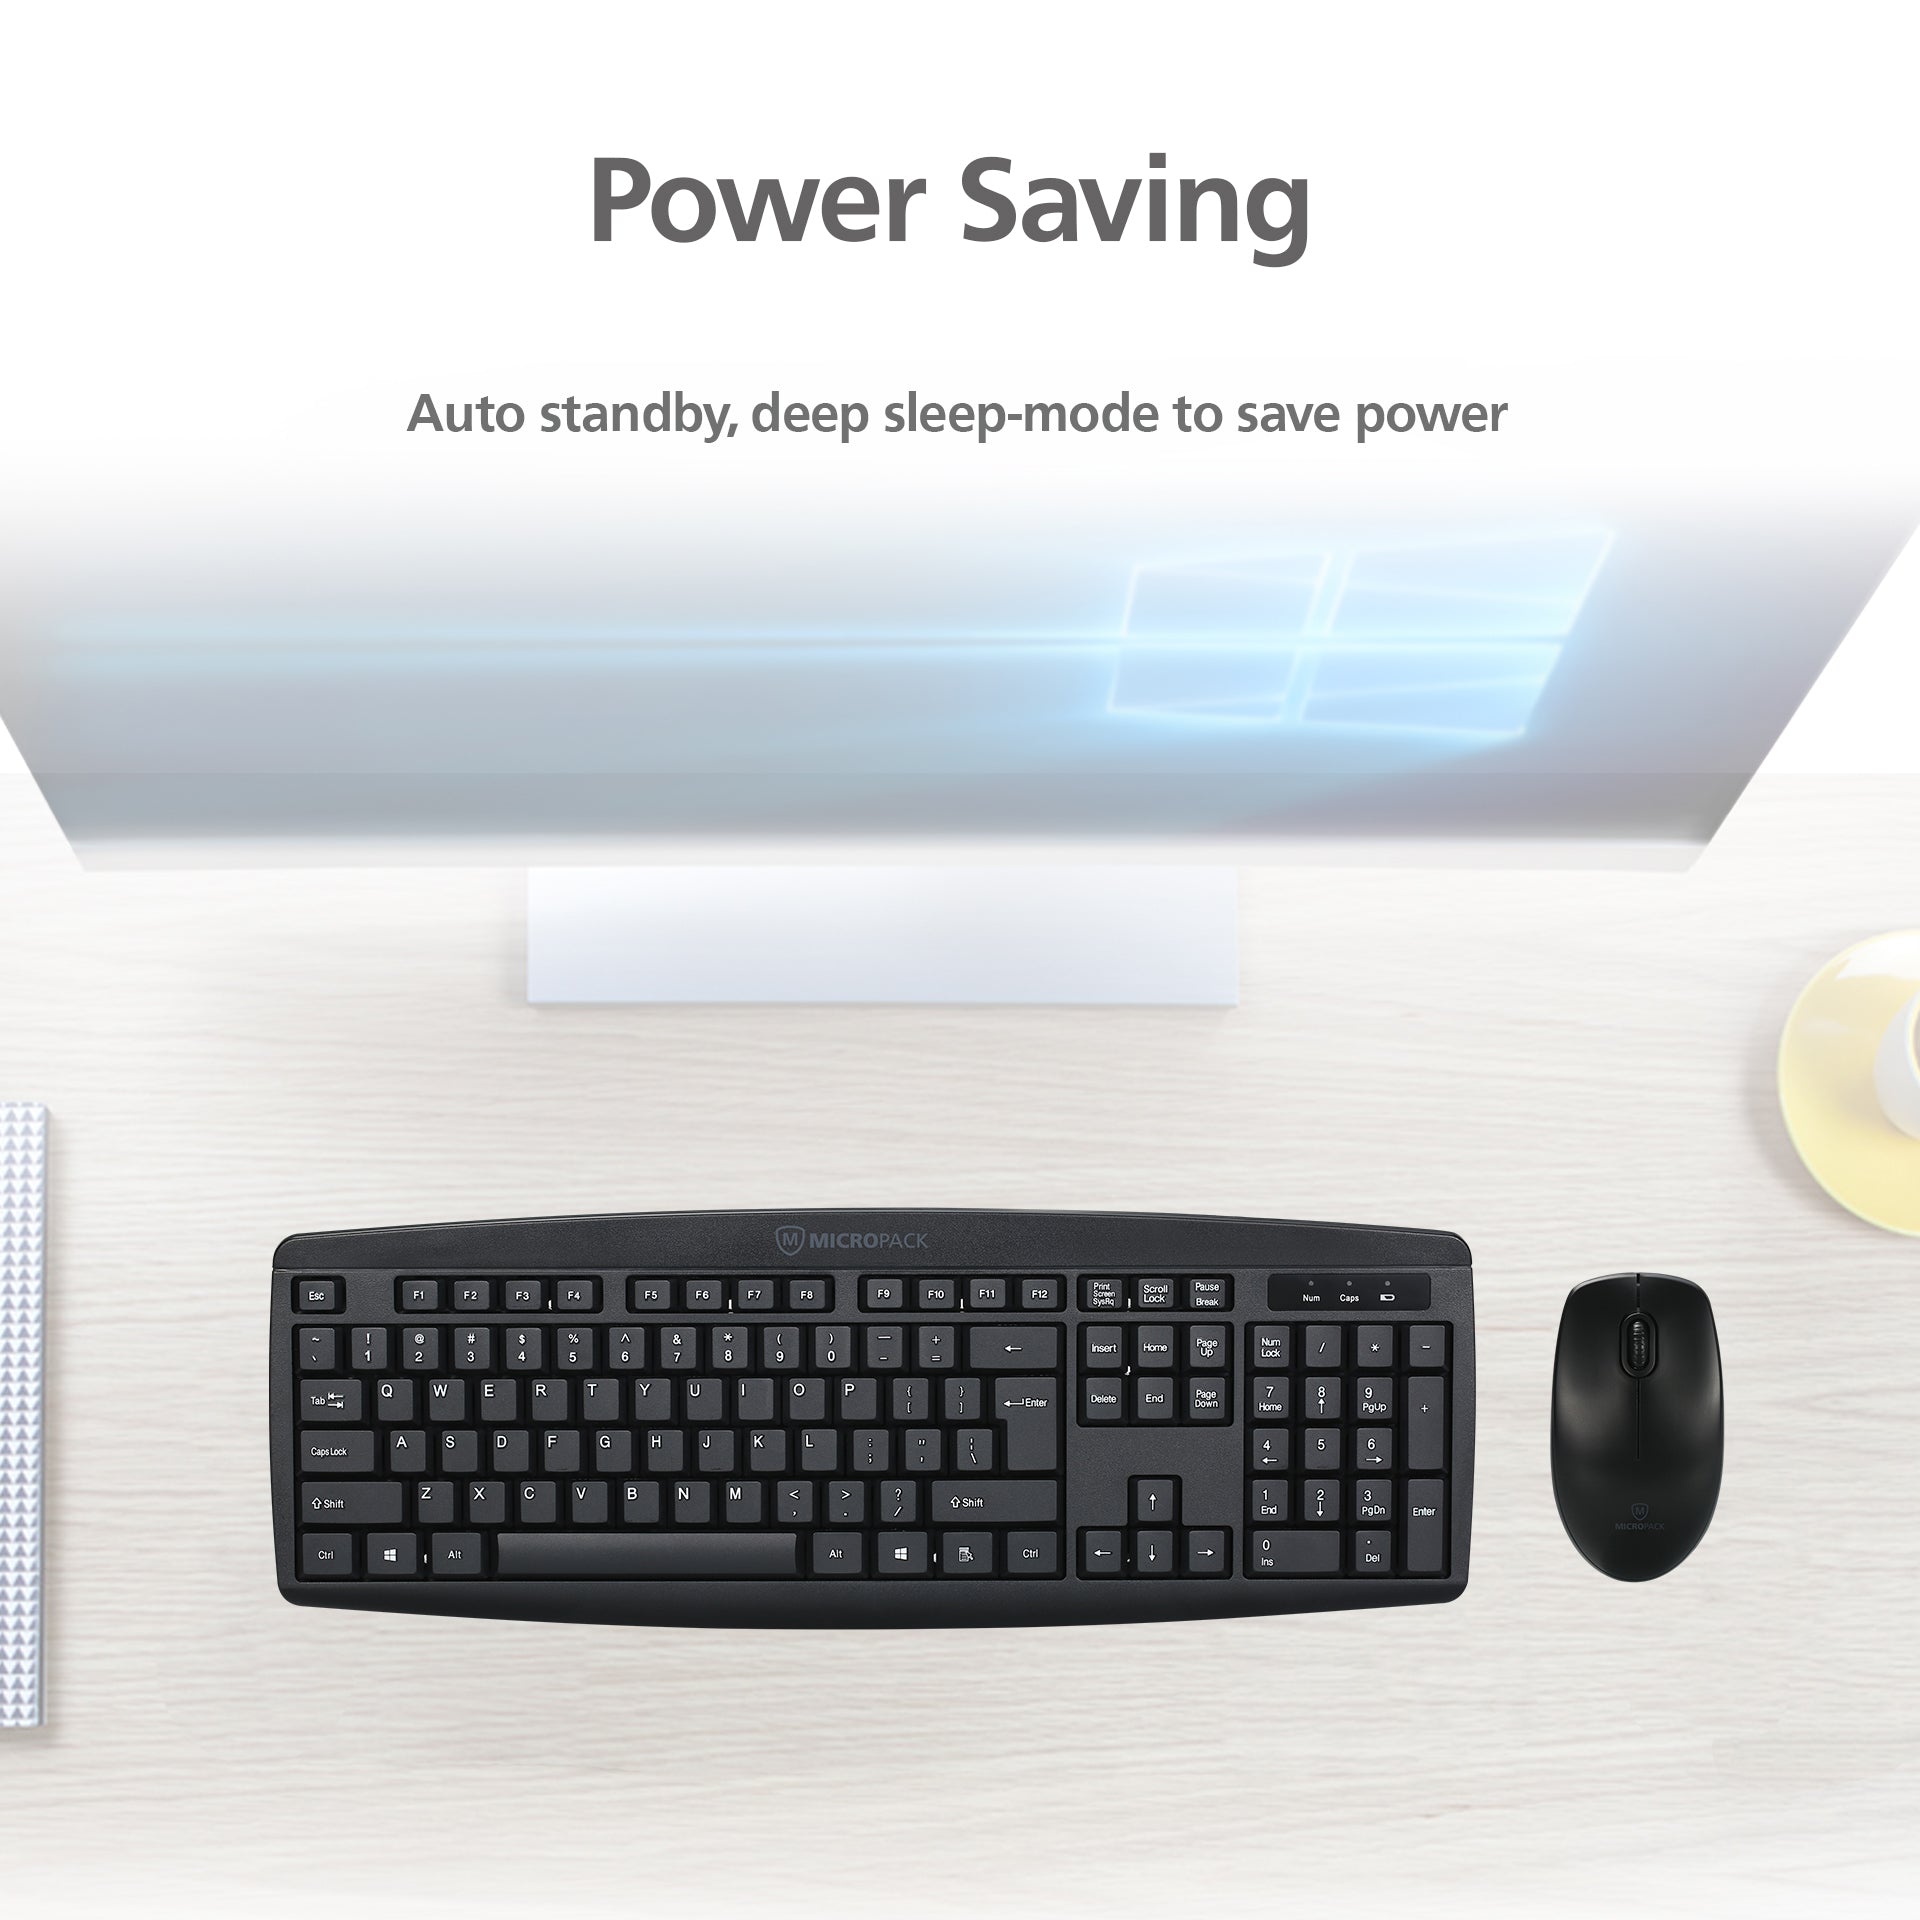 Wholesale Wireless Keyboard and Mouse Combo MICROPACK KM-203W